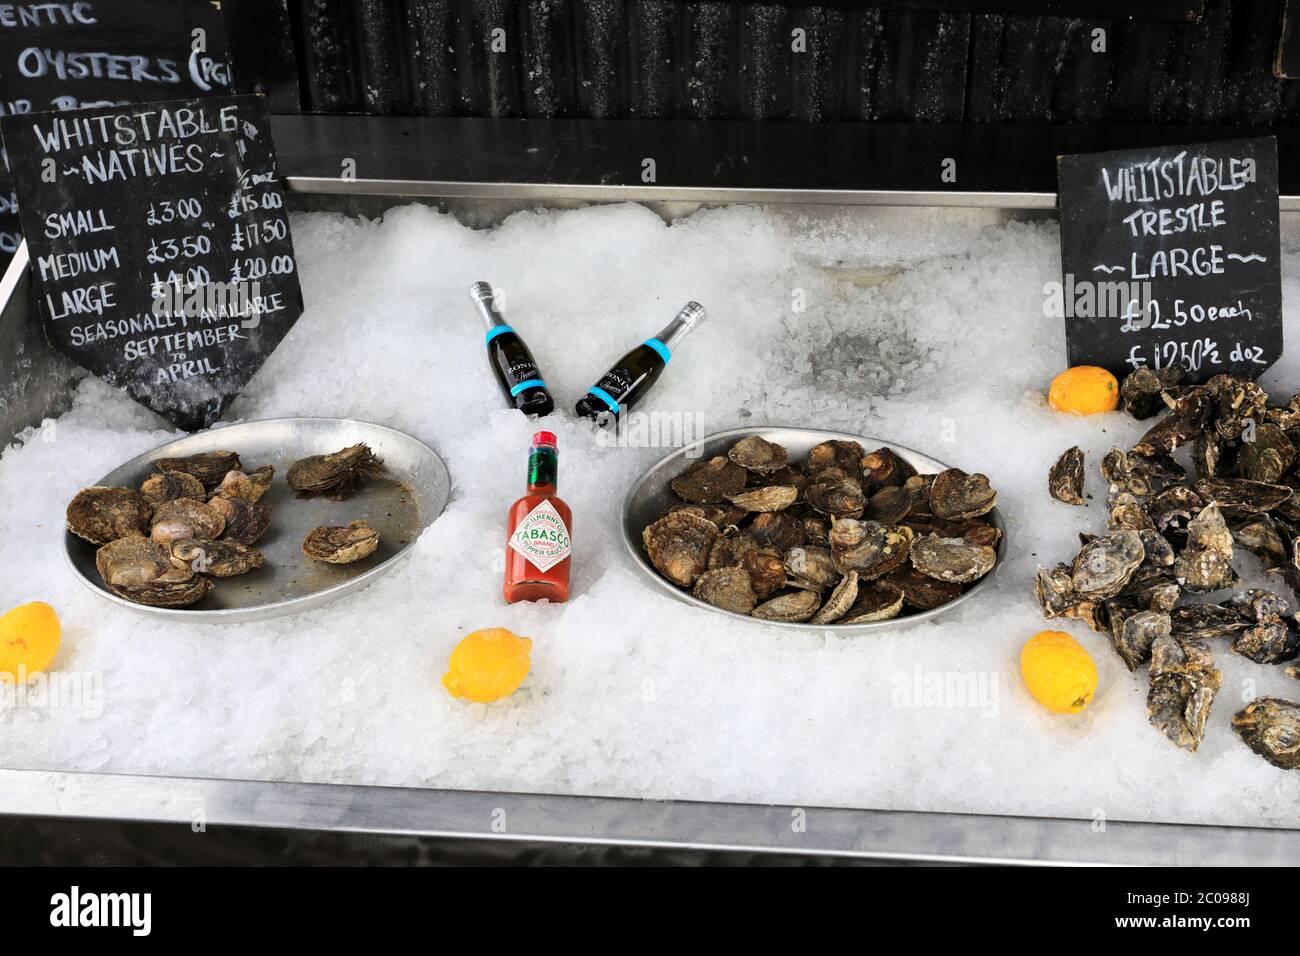 Whitstable Oysters for sale, Whitstable Harbour, Whitstable town, Kent County; England; UK Stock Photo